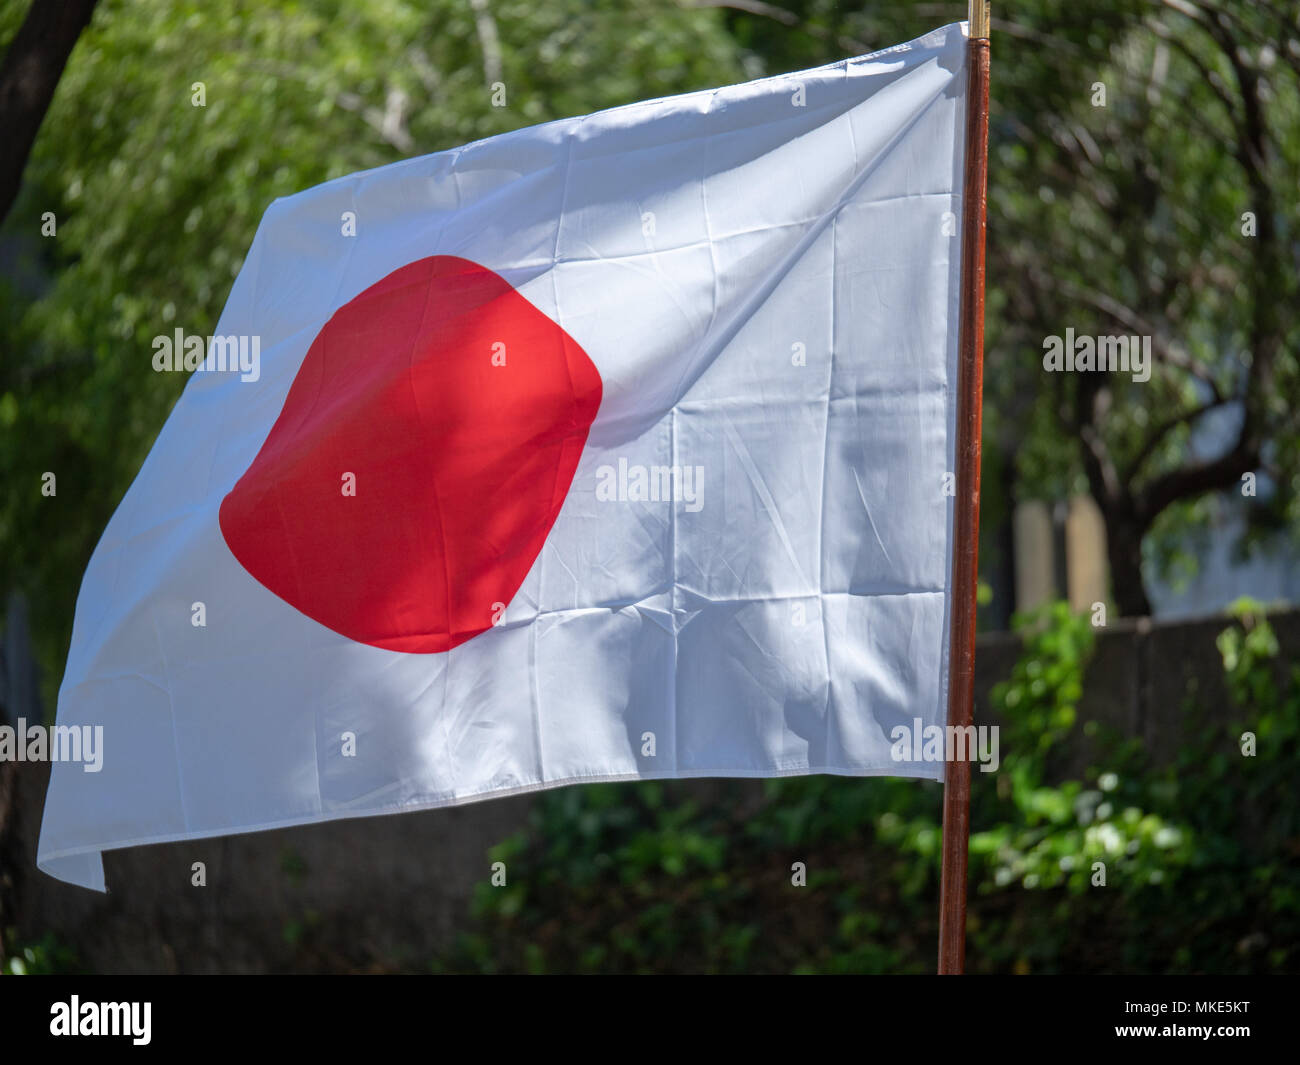 Japanese Land Of The Rising Sun Flag Waving In The Wind Stock Photo Alamy